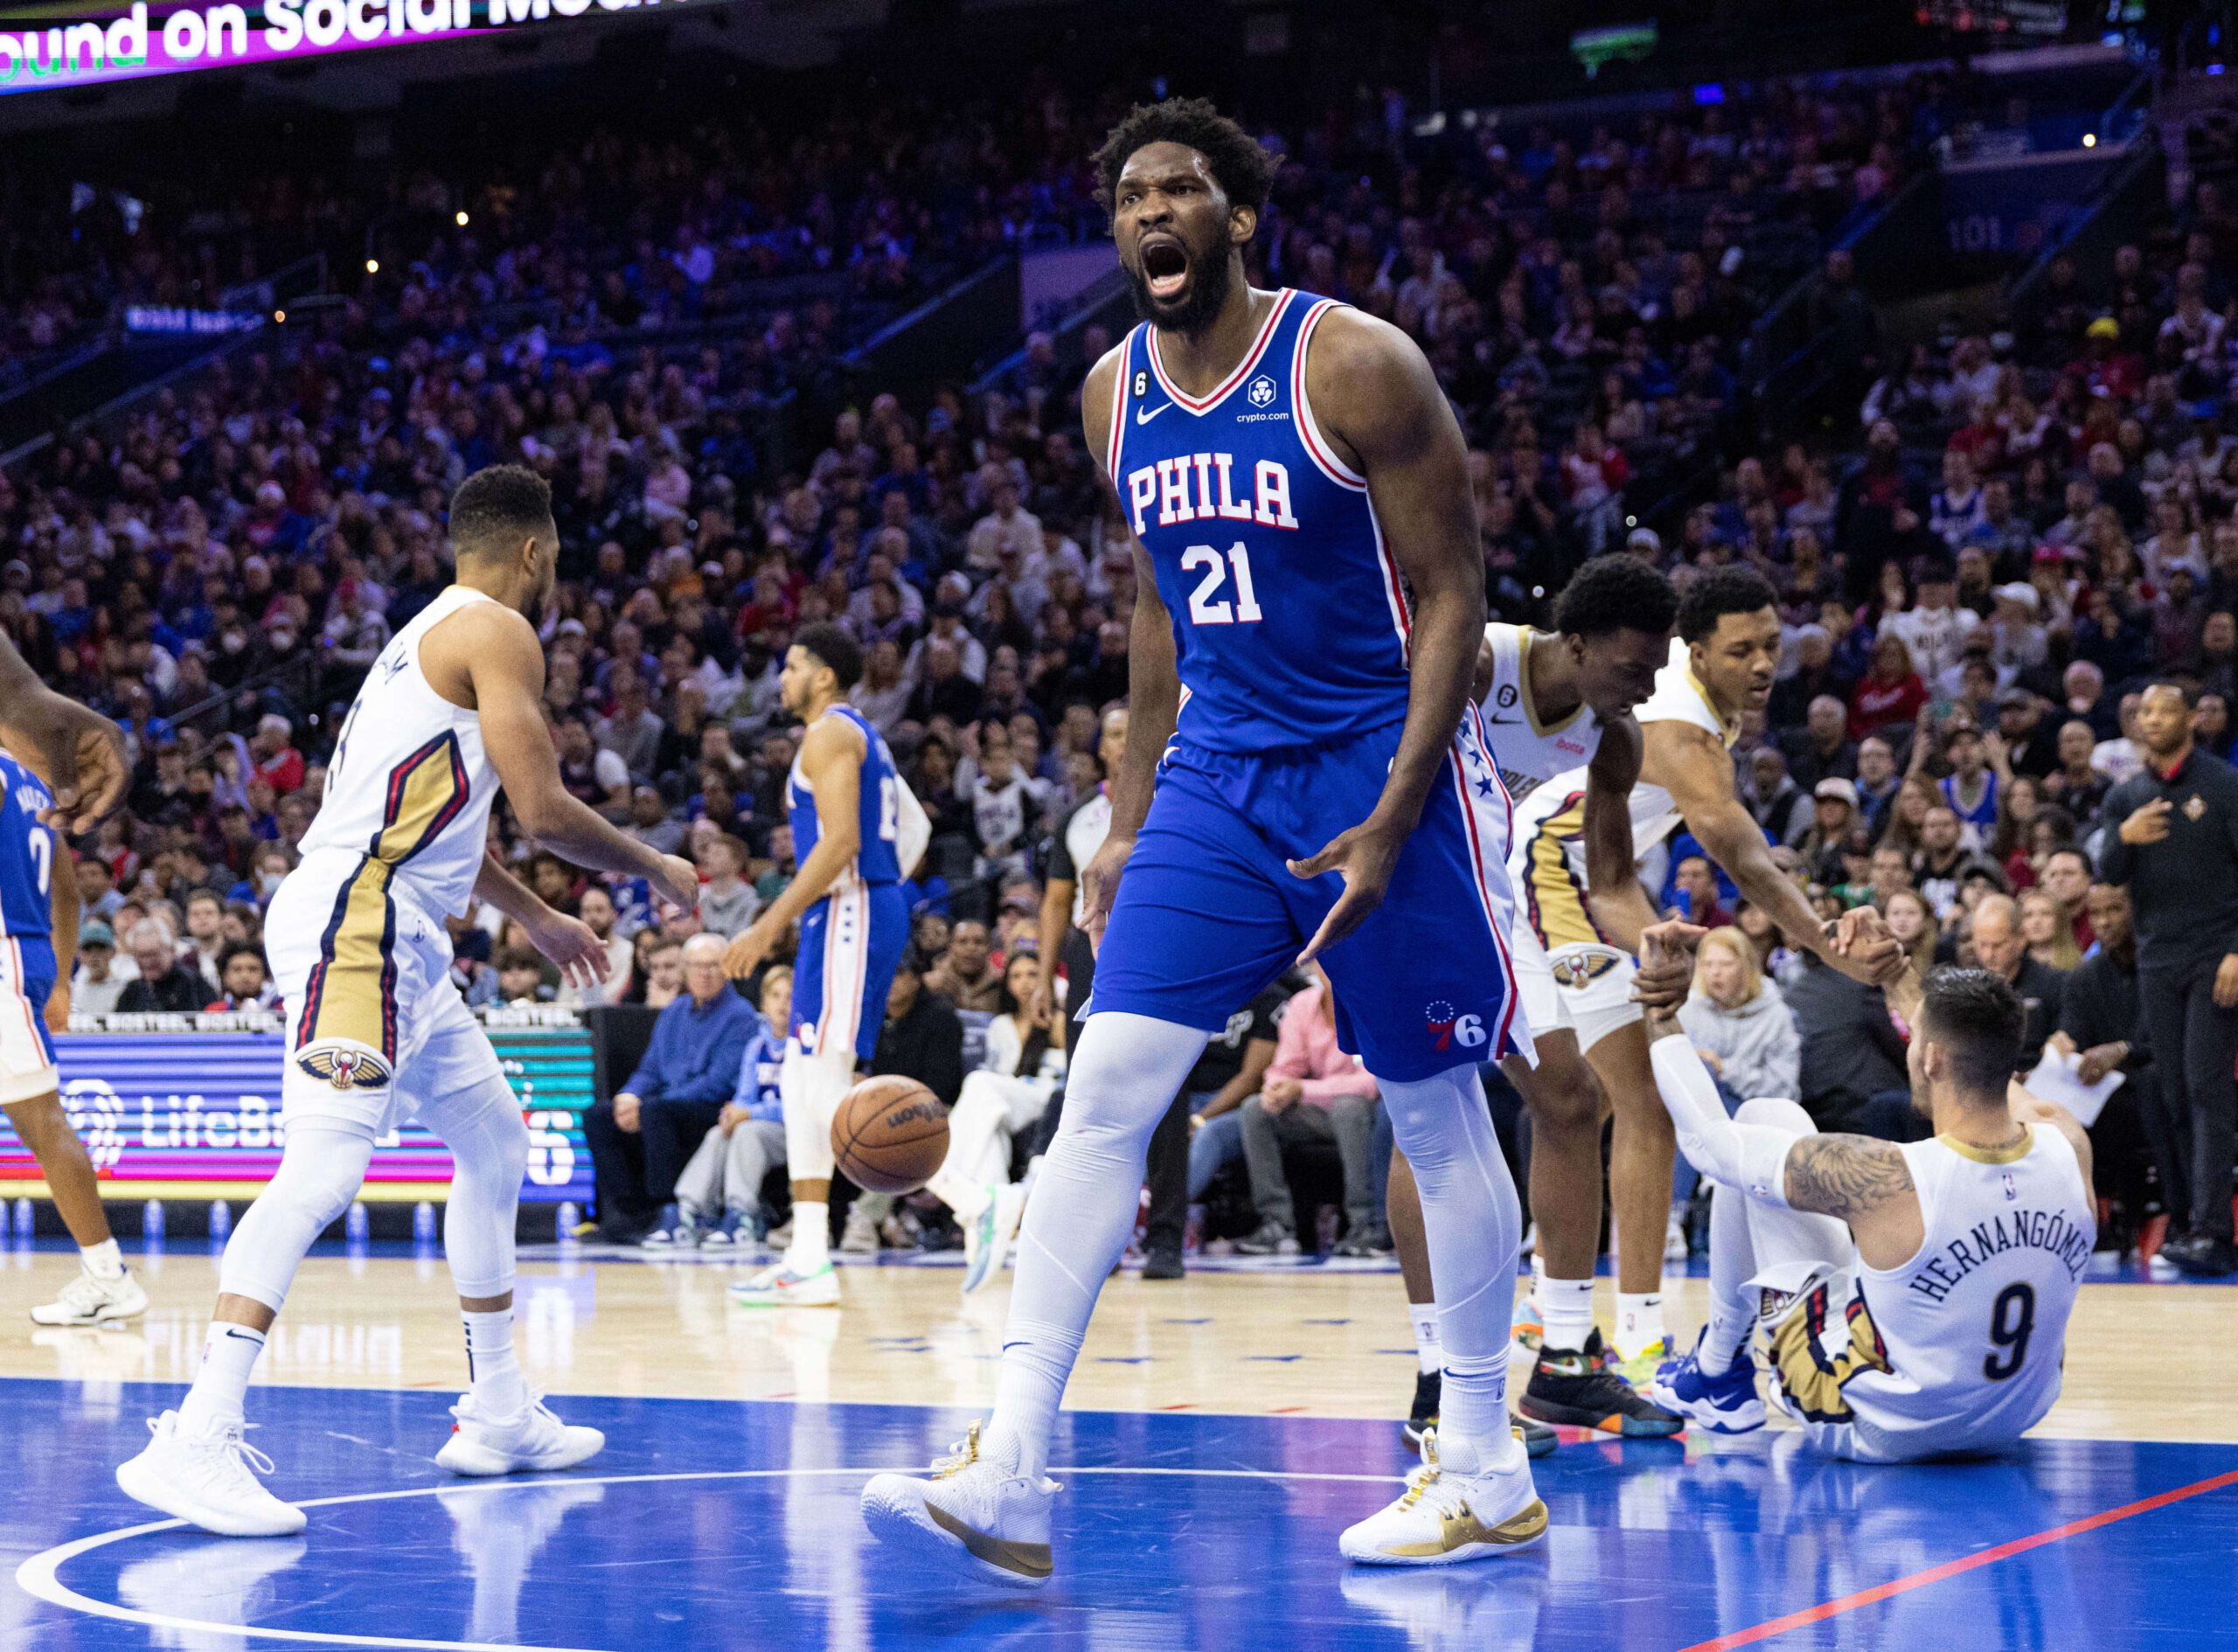 Joel Embiid plays big, Zion Williamson injured as Sixers down Pelicans